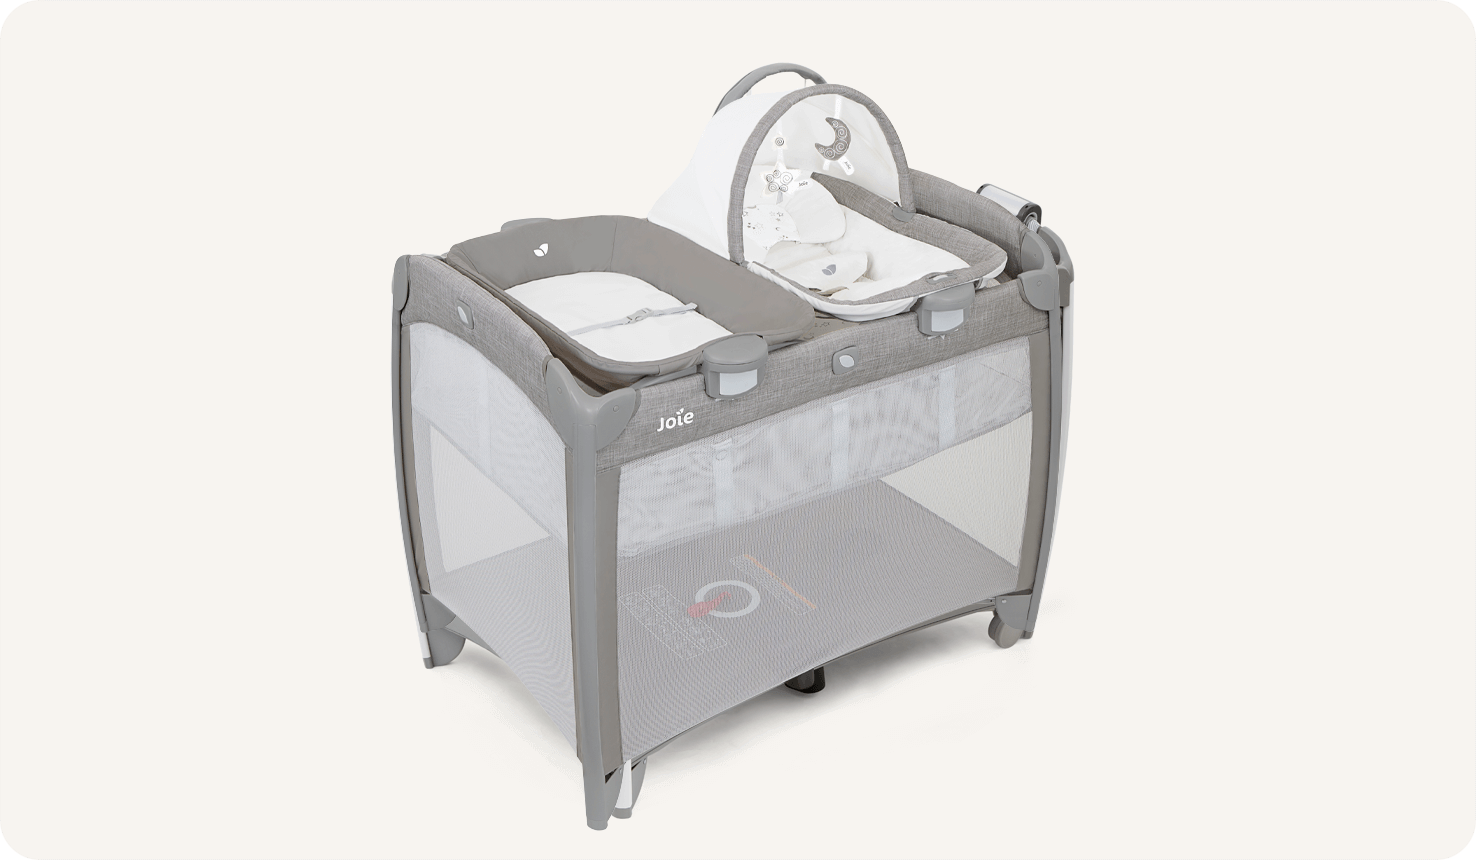  Joie excursion change and rock travel cot in gray with cartoon imagery at an angle.